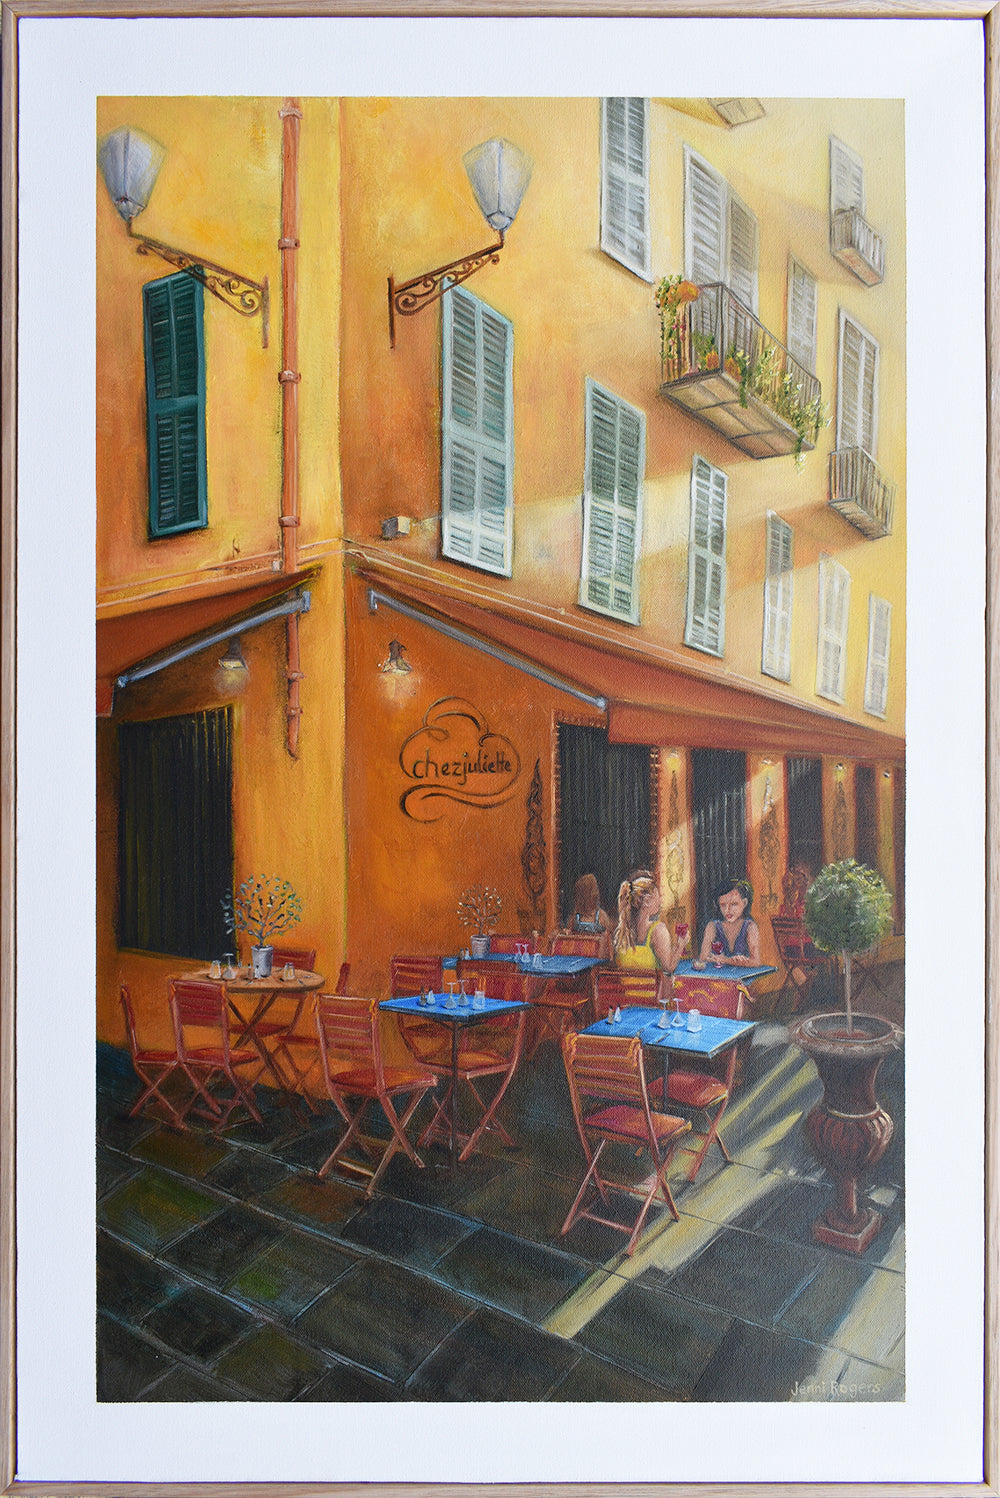 A painting of a yellow building with French window shutters and a cafe underneath the awnings of the streets of Nice, France hanging on a wall by Australian artist Jenni Rogers